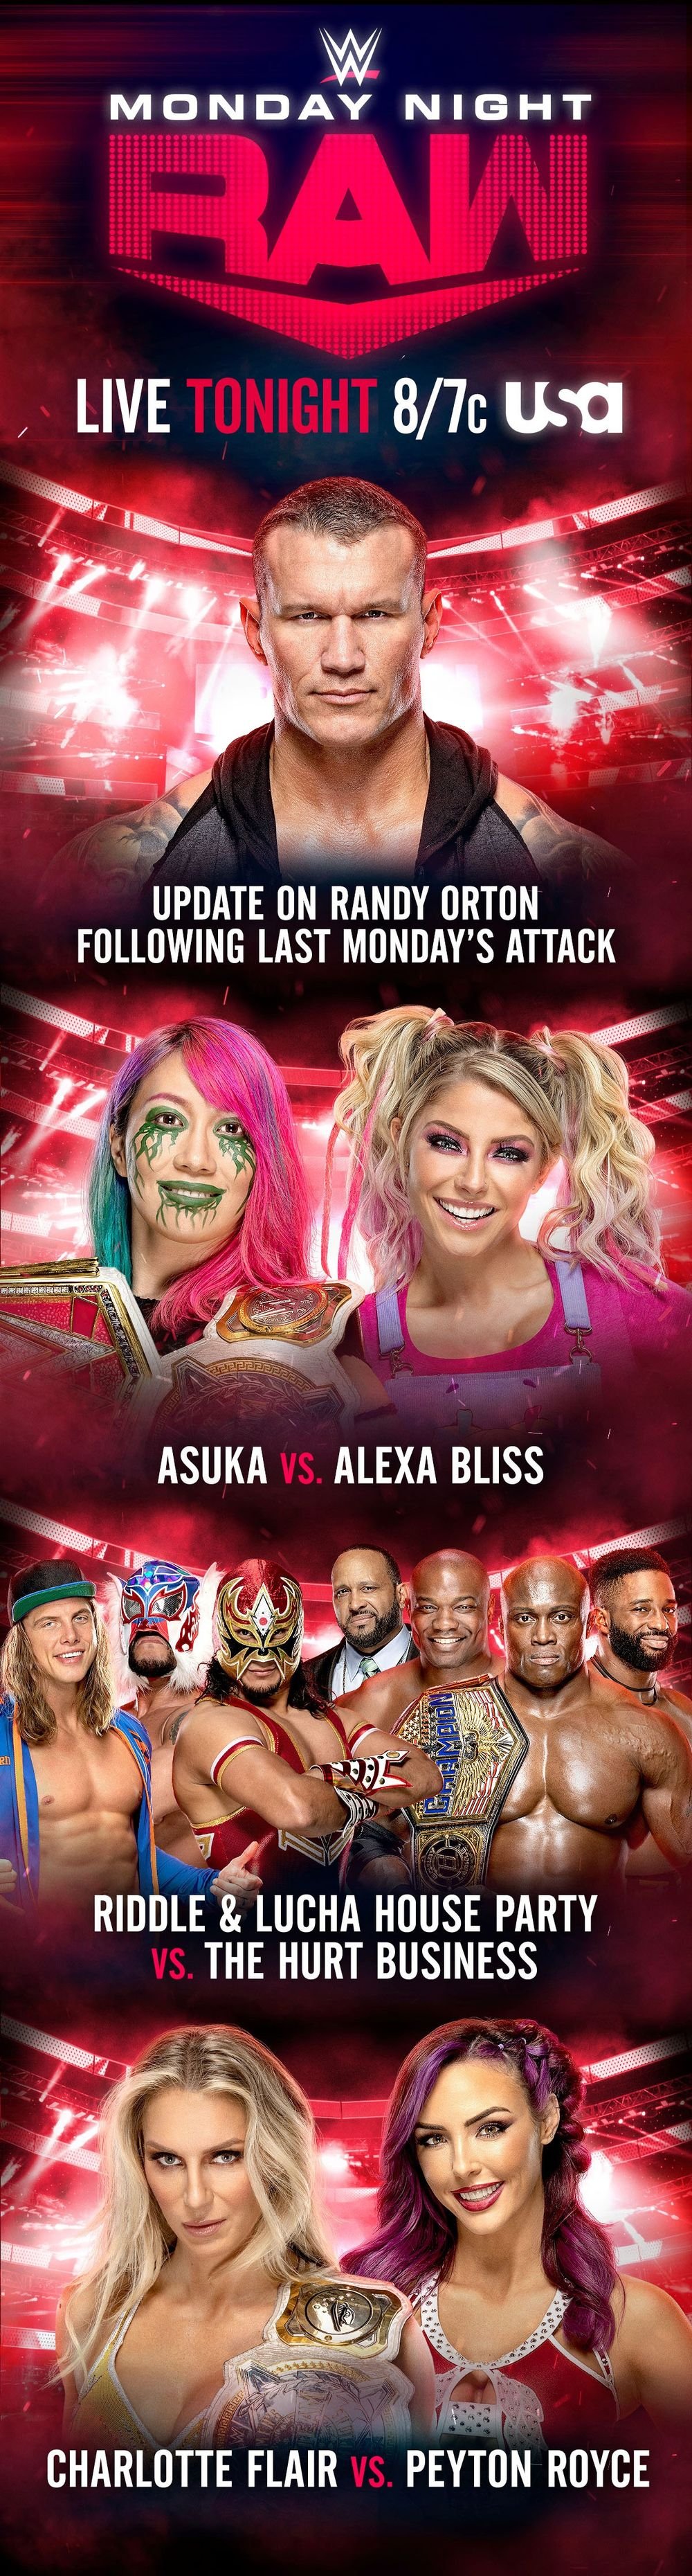 Alexa Bliss - WWE SuperCard Season 4 is out now! Check out my new